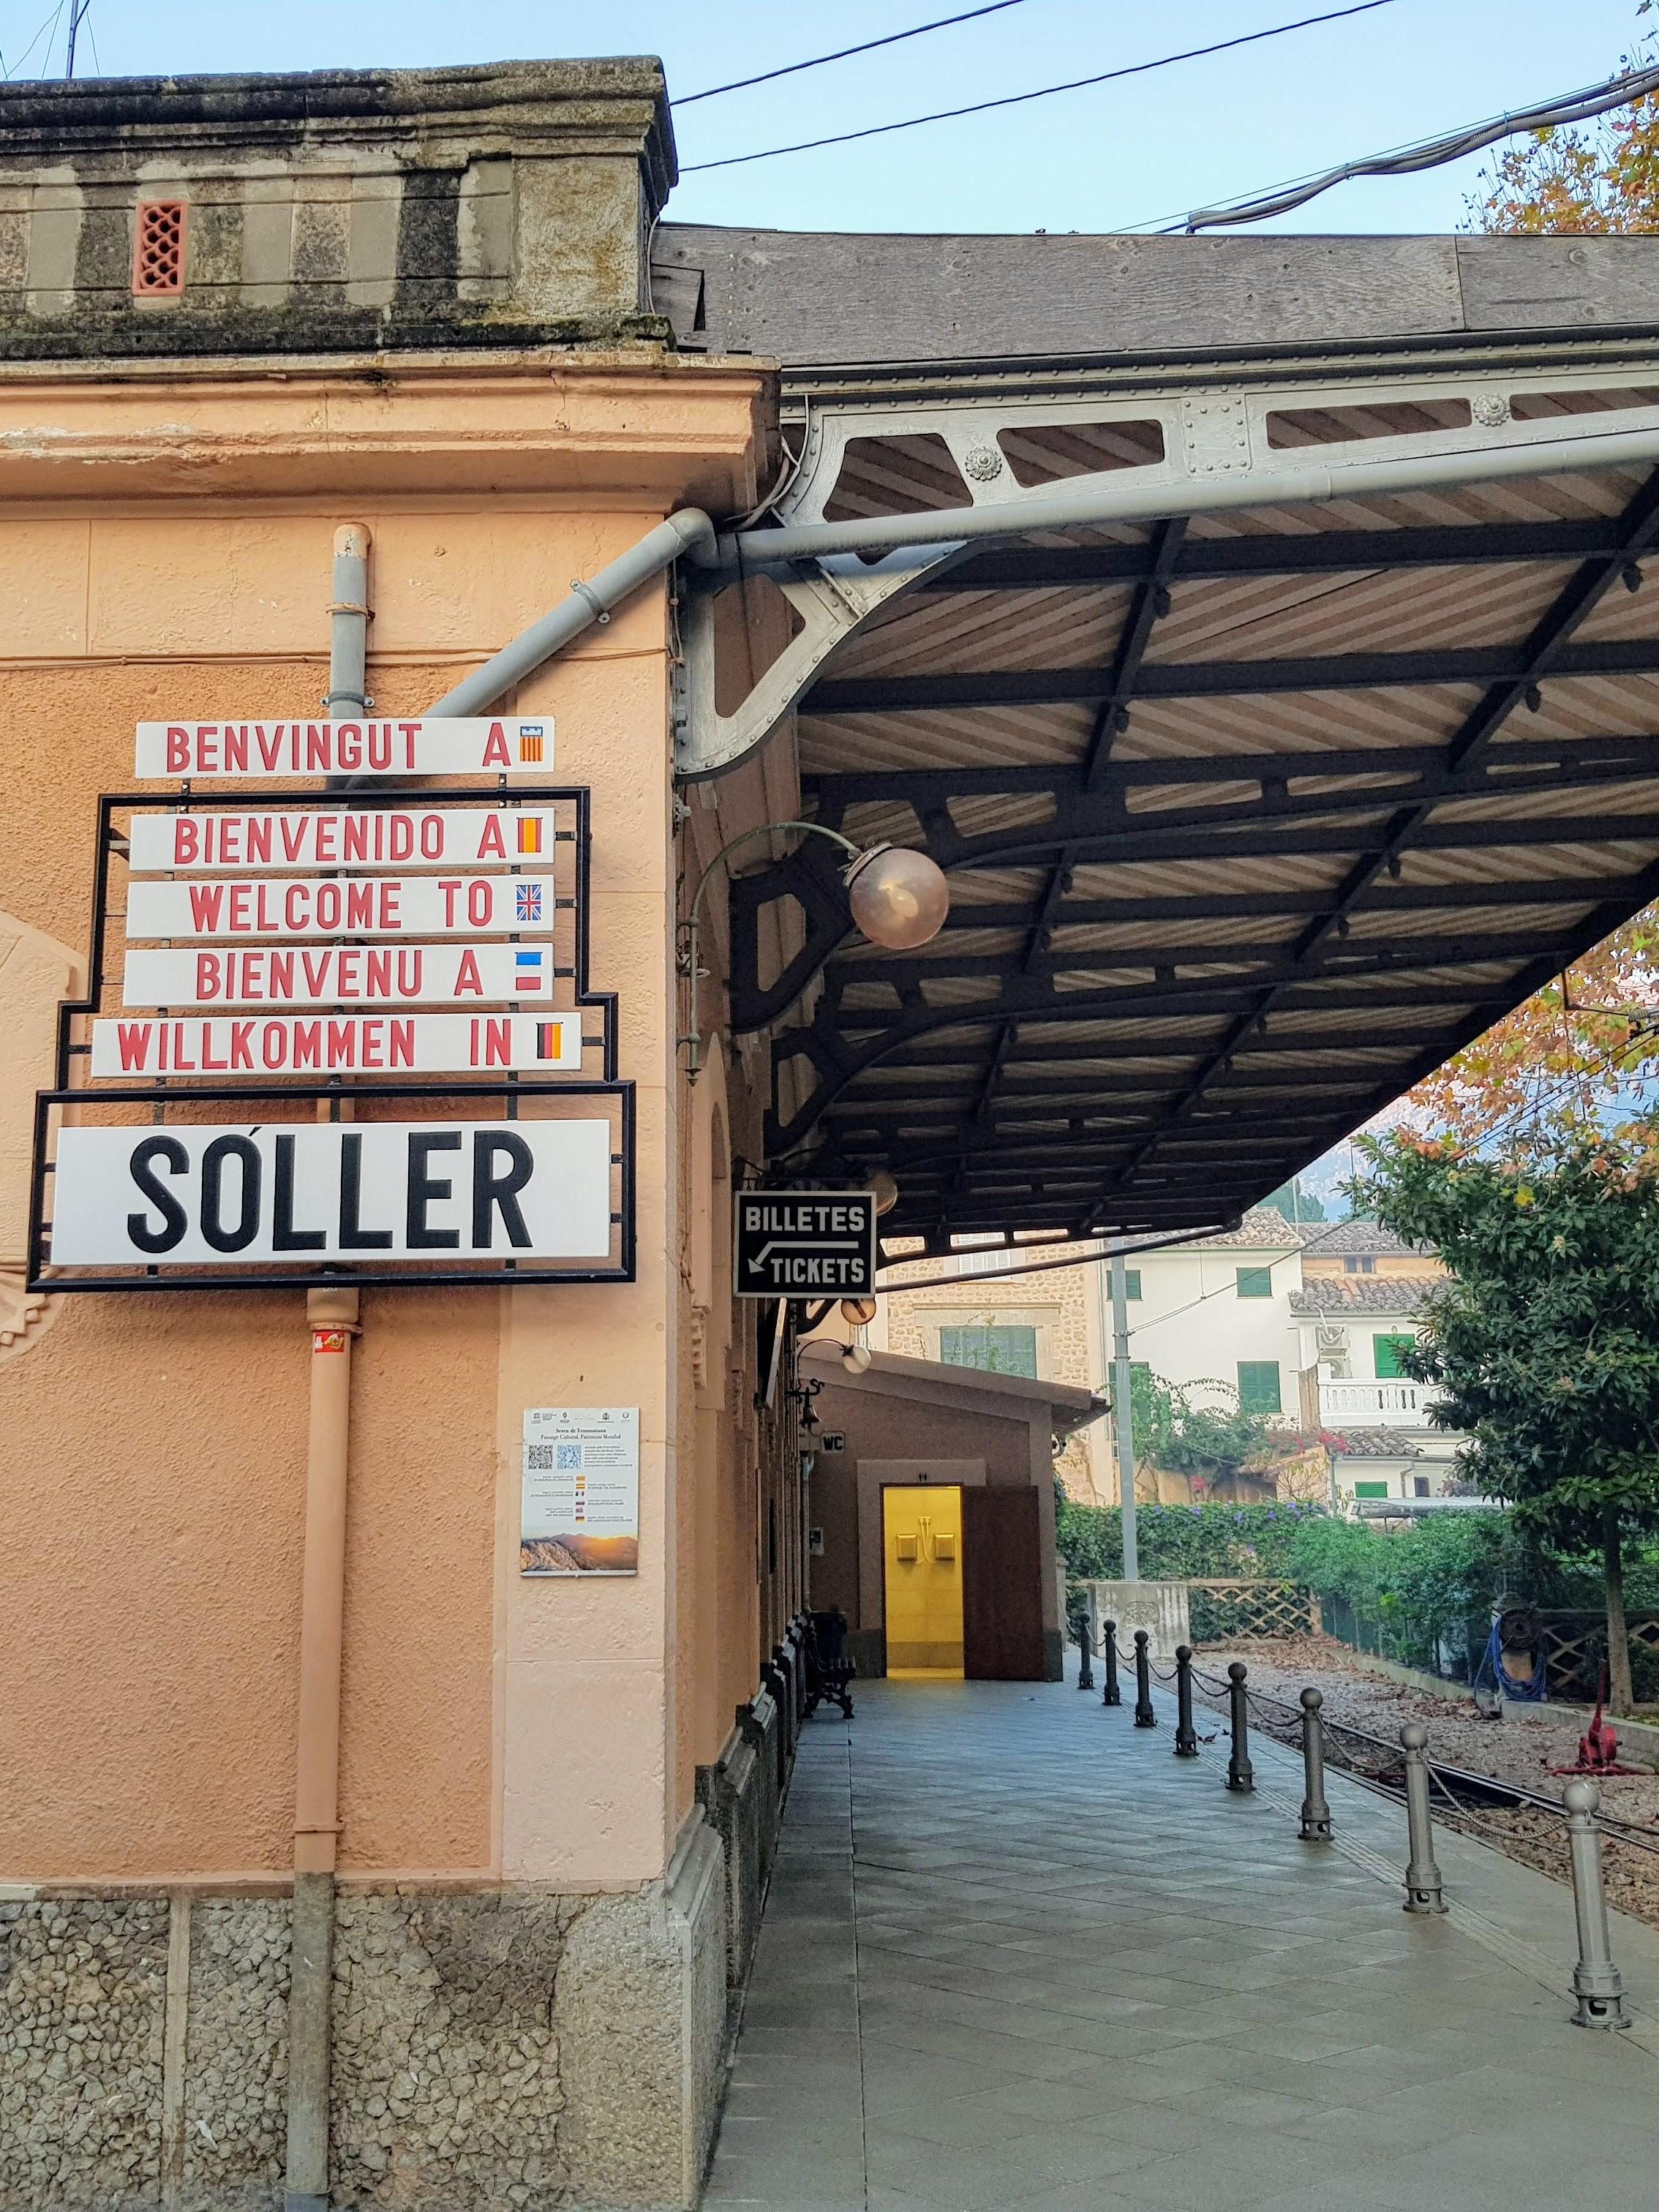 Train Station at Soller in Mallorca